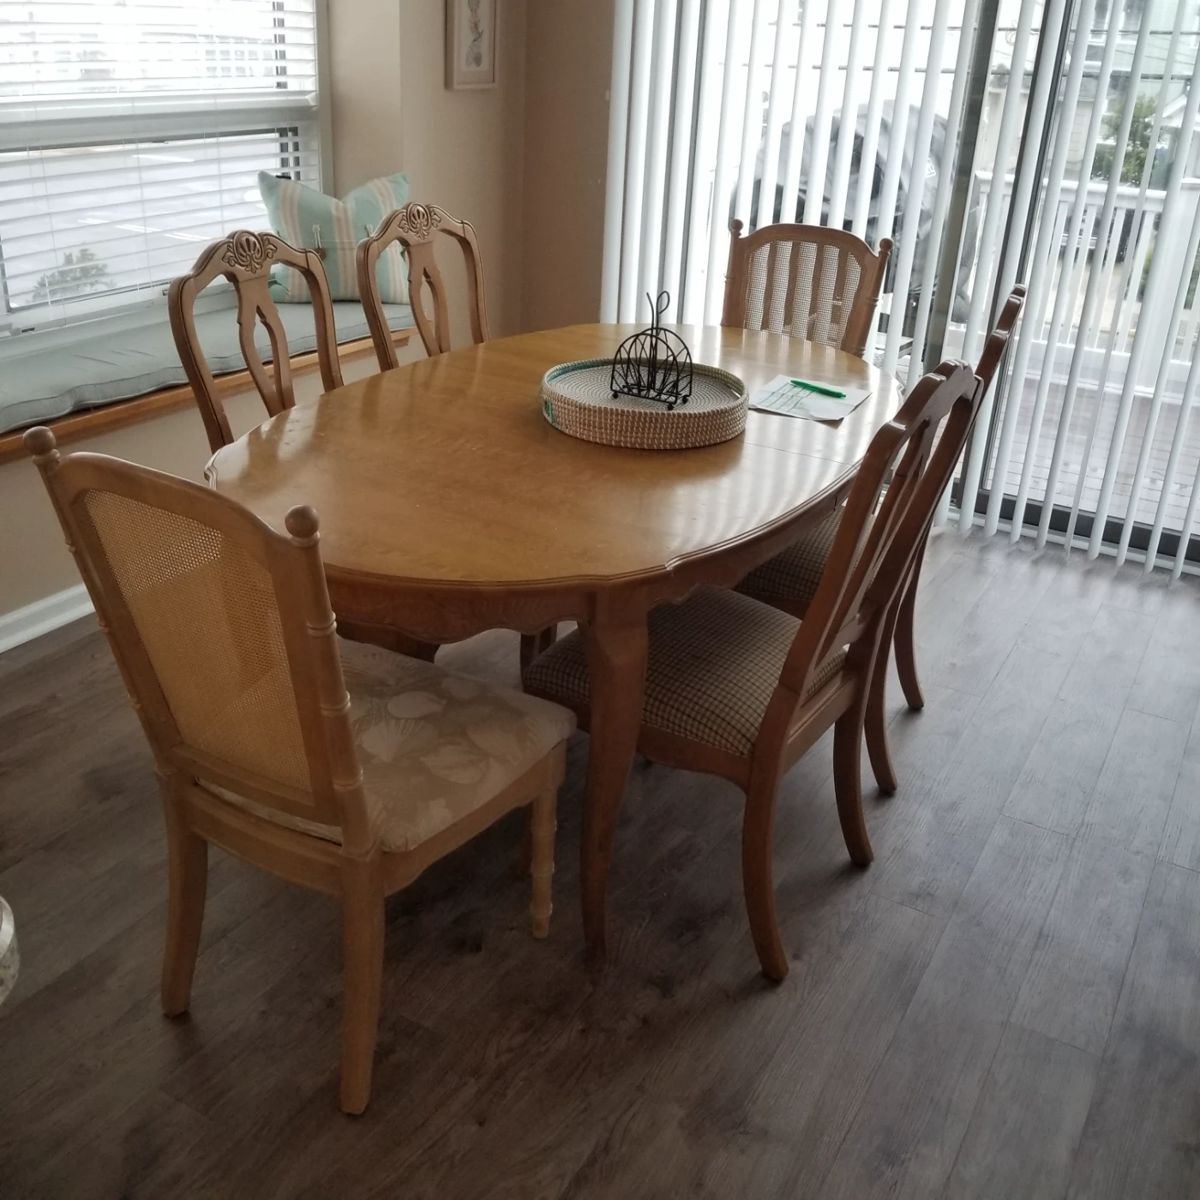 Dining table seats 8